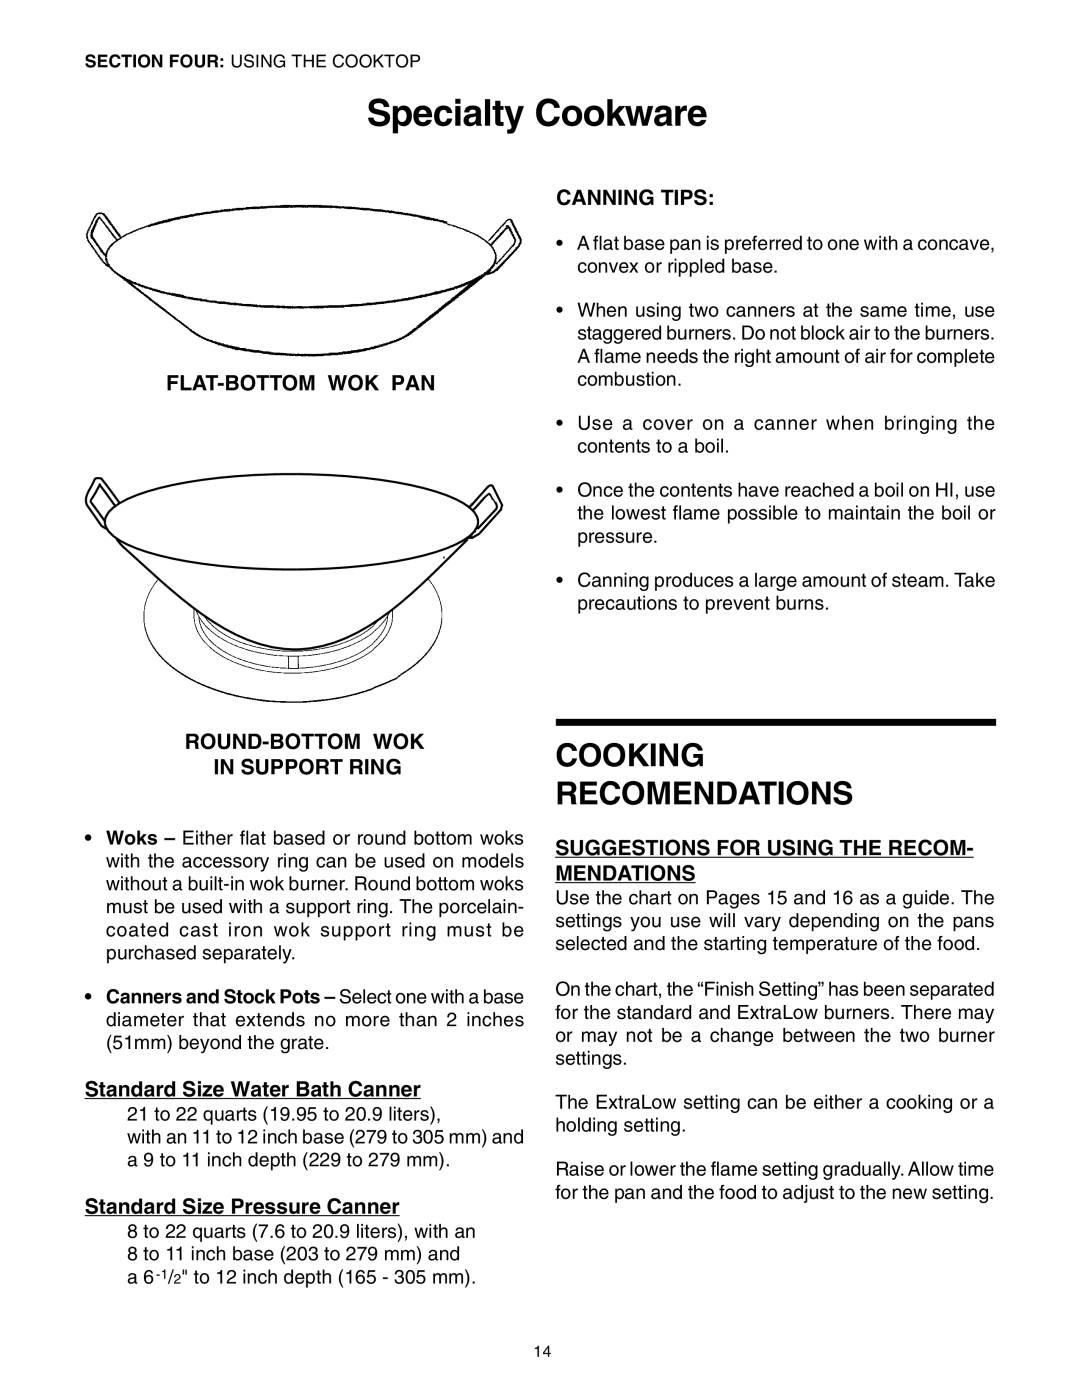 Thermador PRG30, PRG36 manual Specialty Cookware, Cooking Recomendations, Canning Tips, Flat-Bottom Wok Pan 